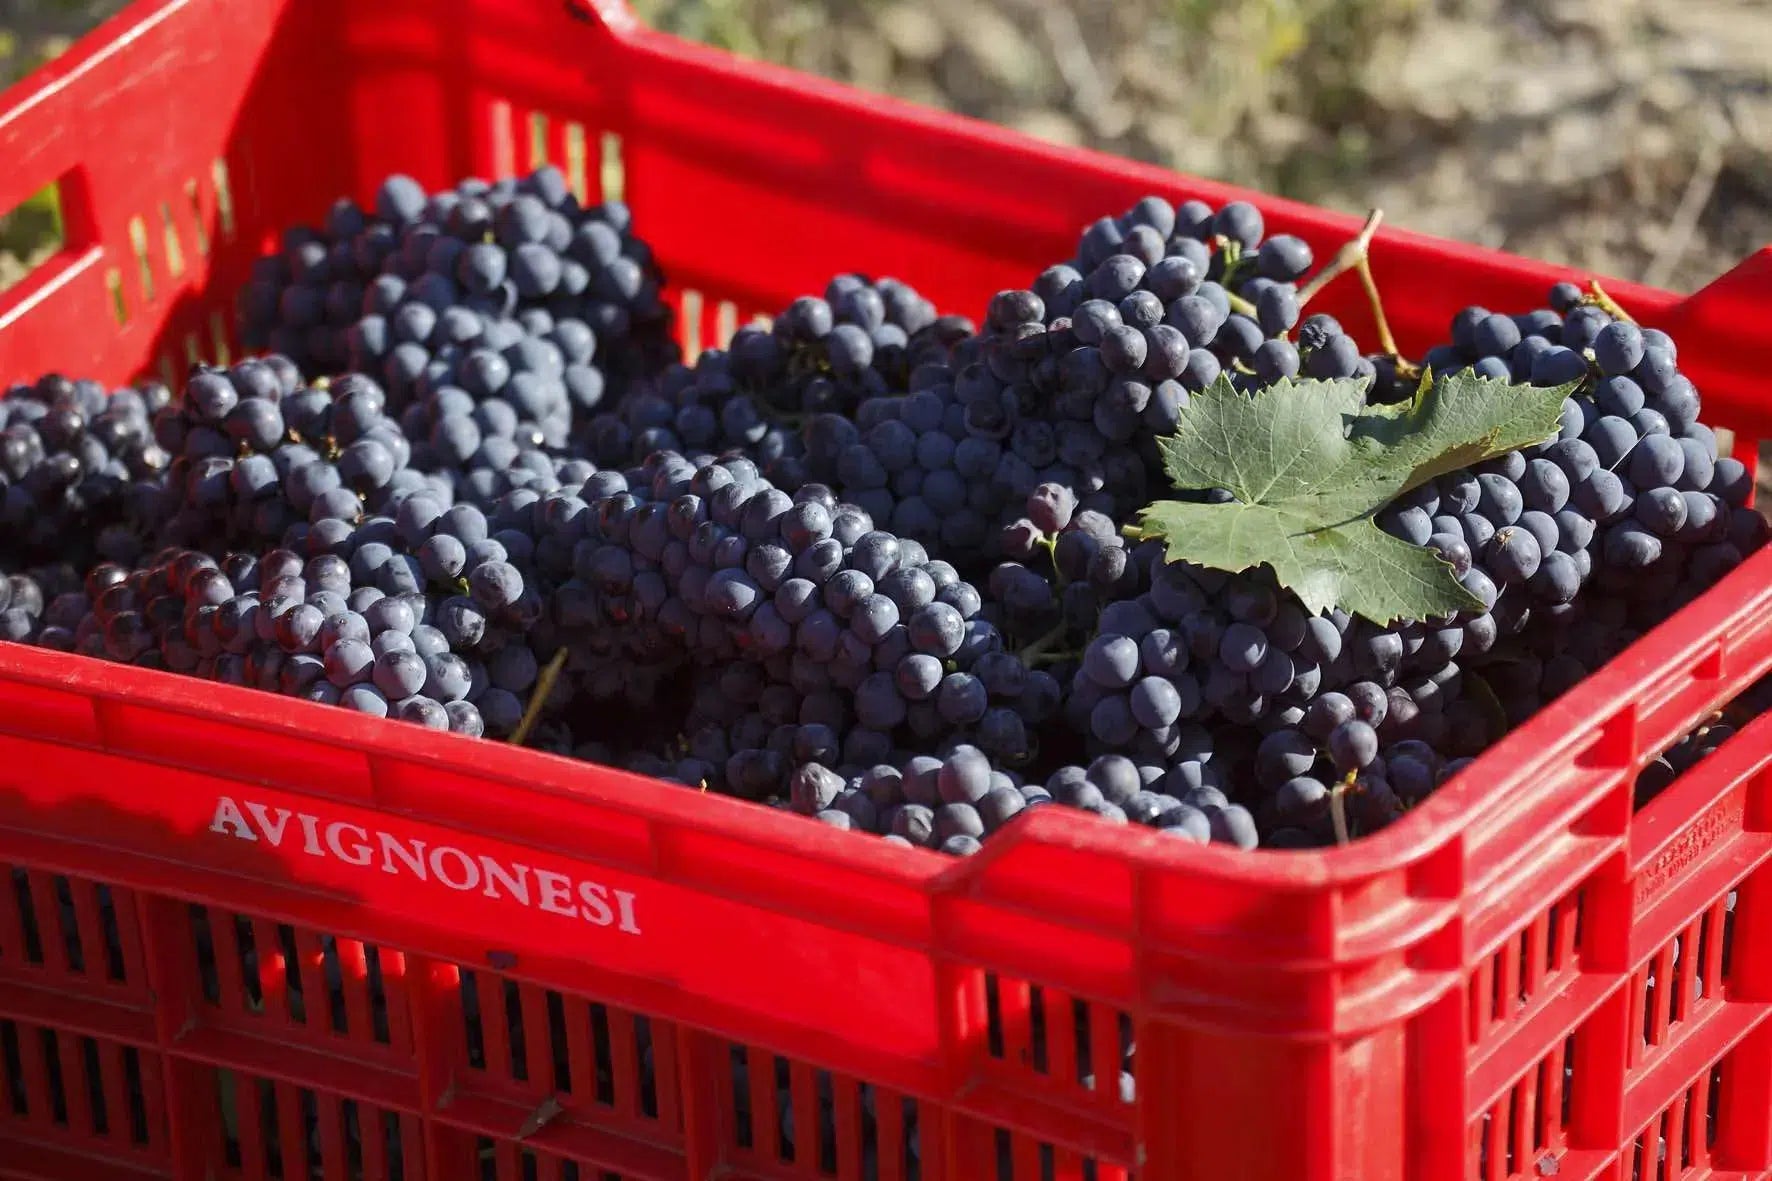 Red plastic trug filled with bunches of black grapes in the Avignonesi vineyards